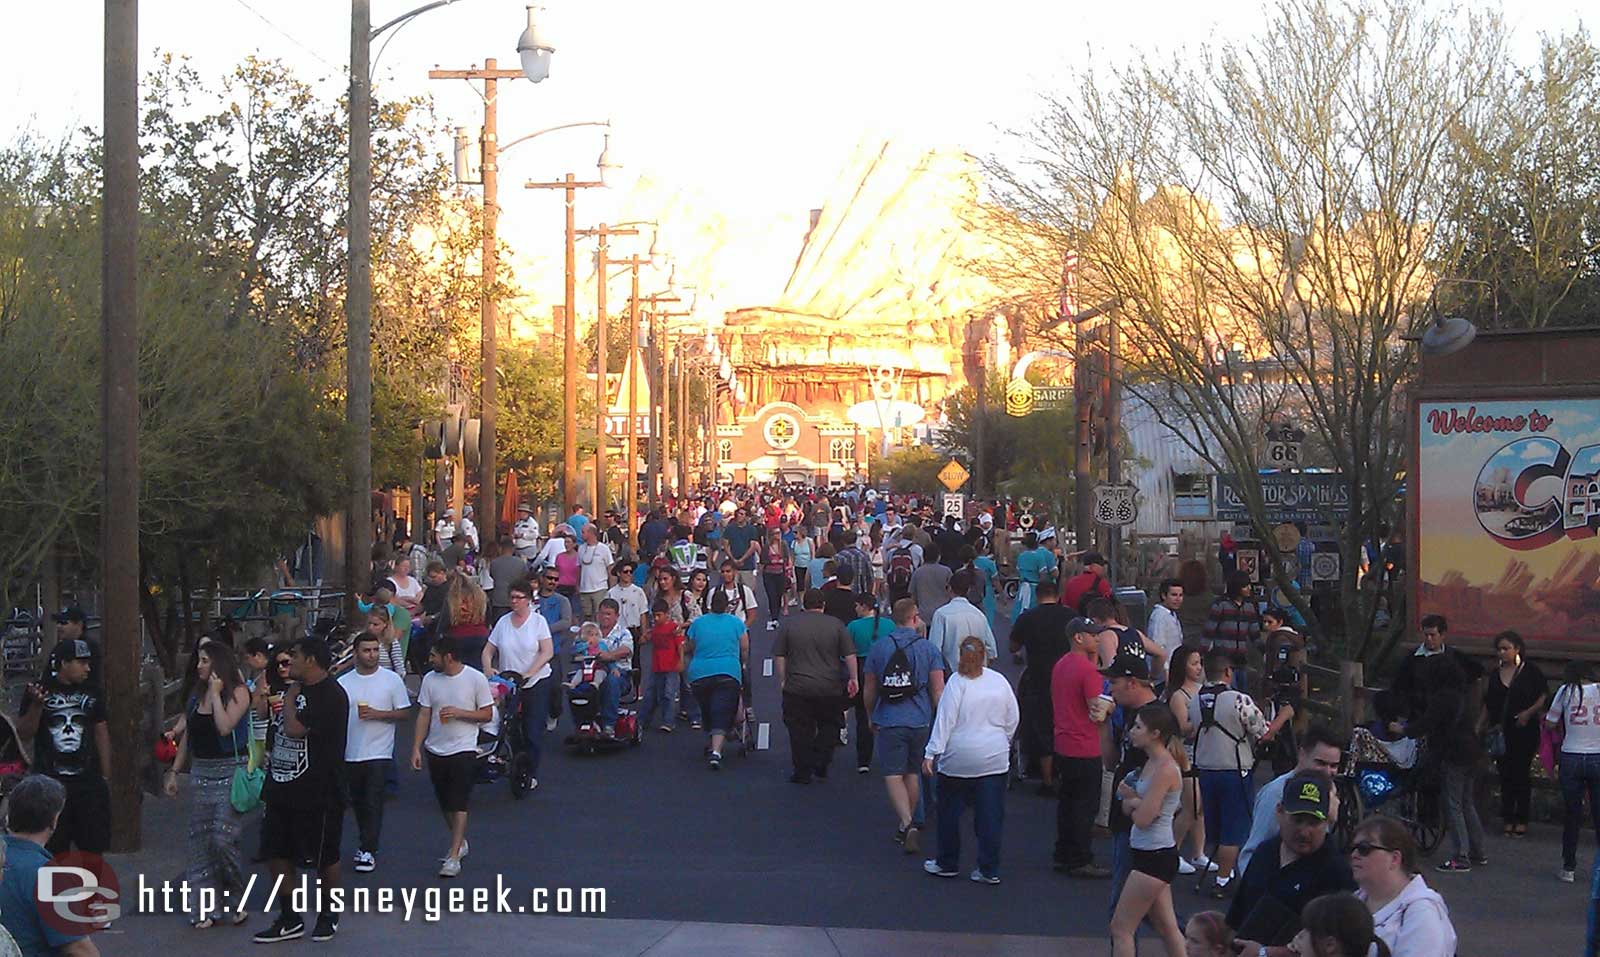 A look down Route 66 in CarsLand too bad all those people are in the way to see the new surface and lines